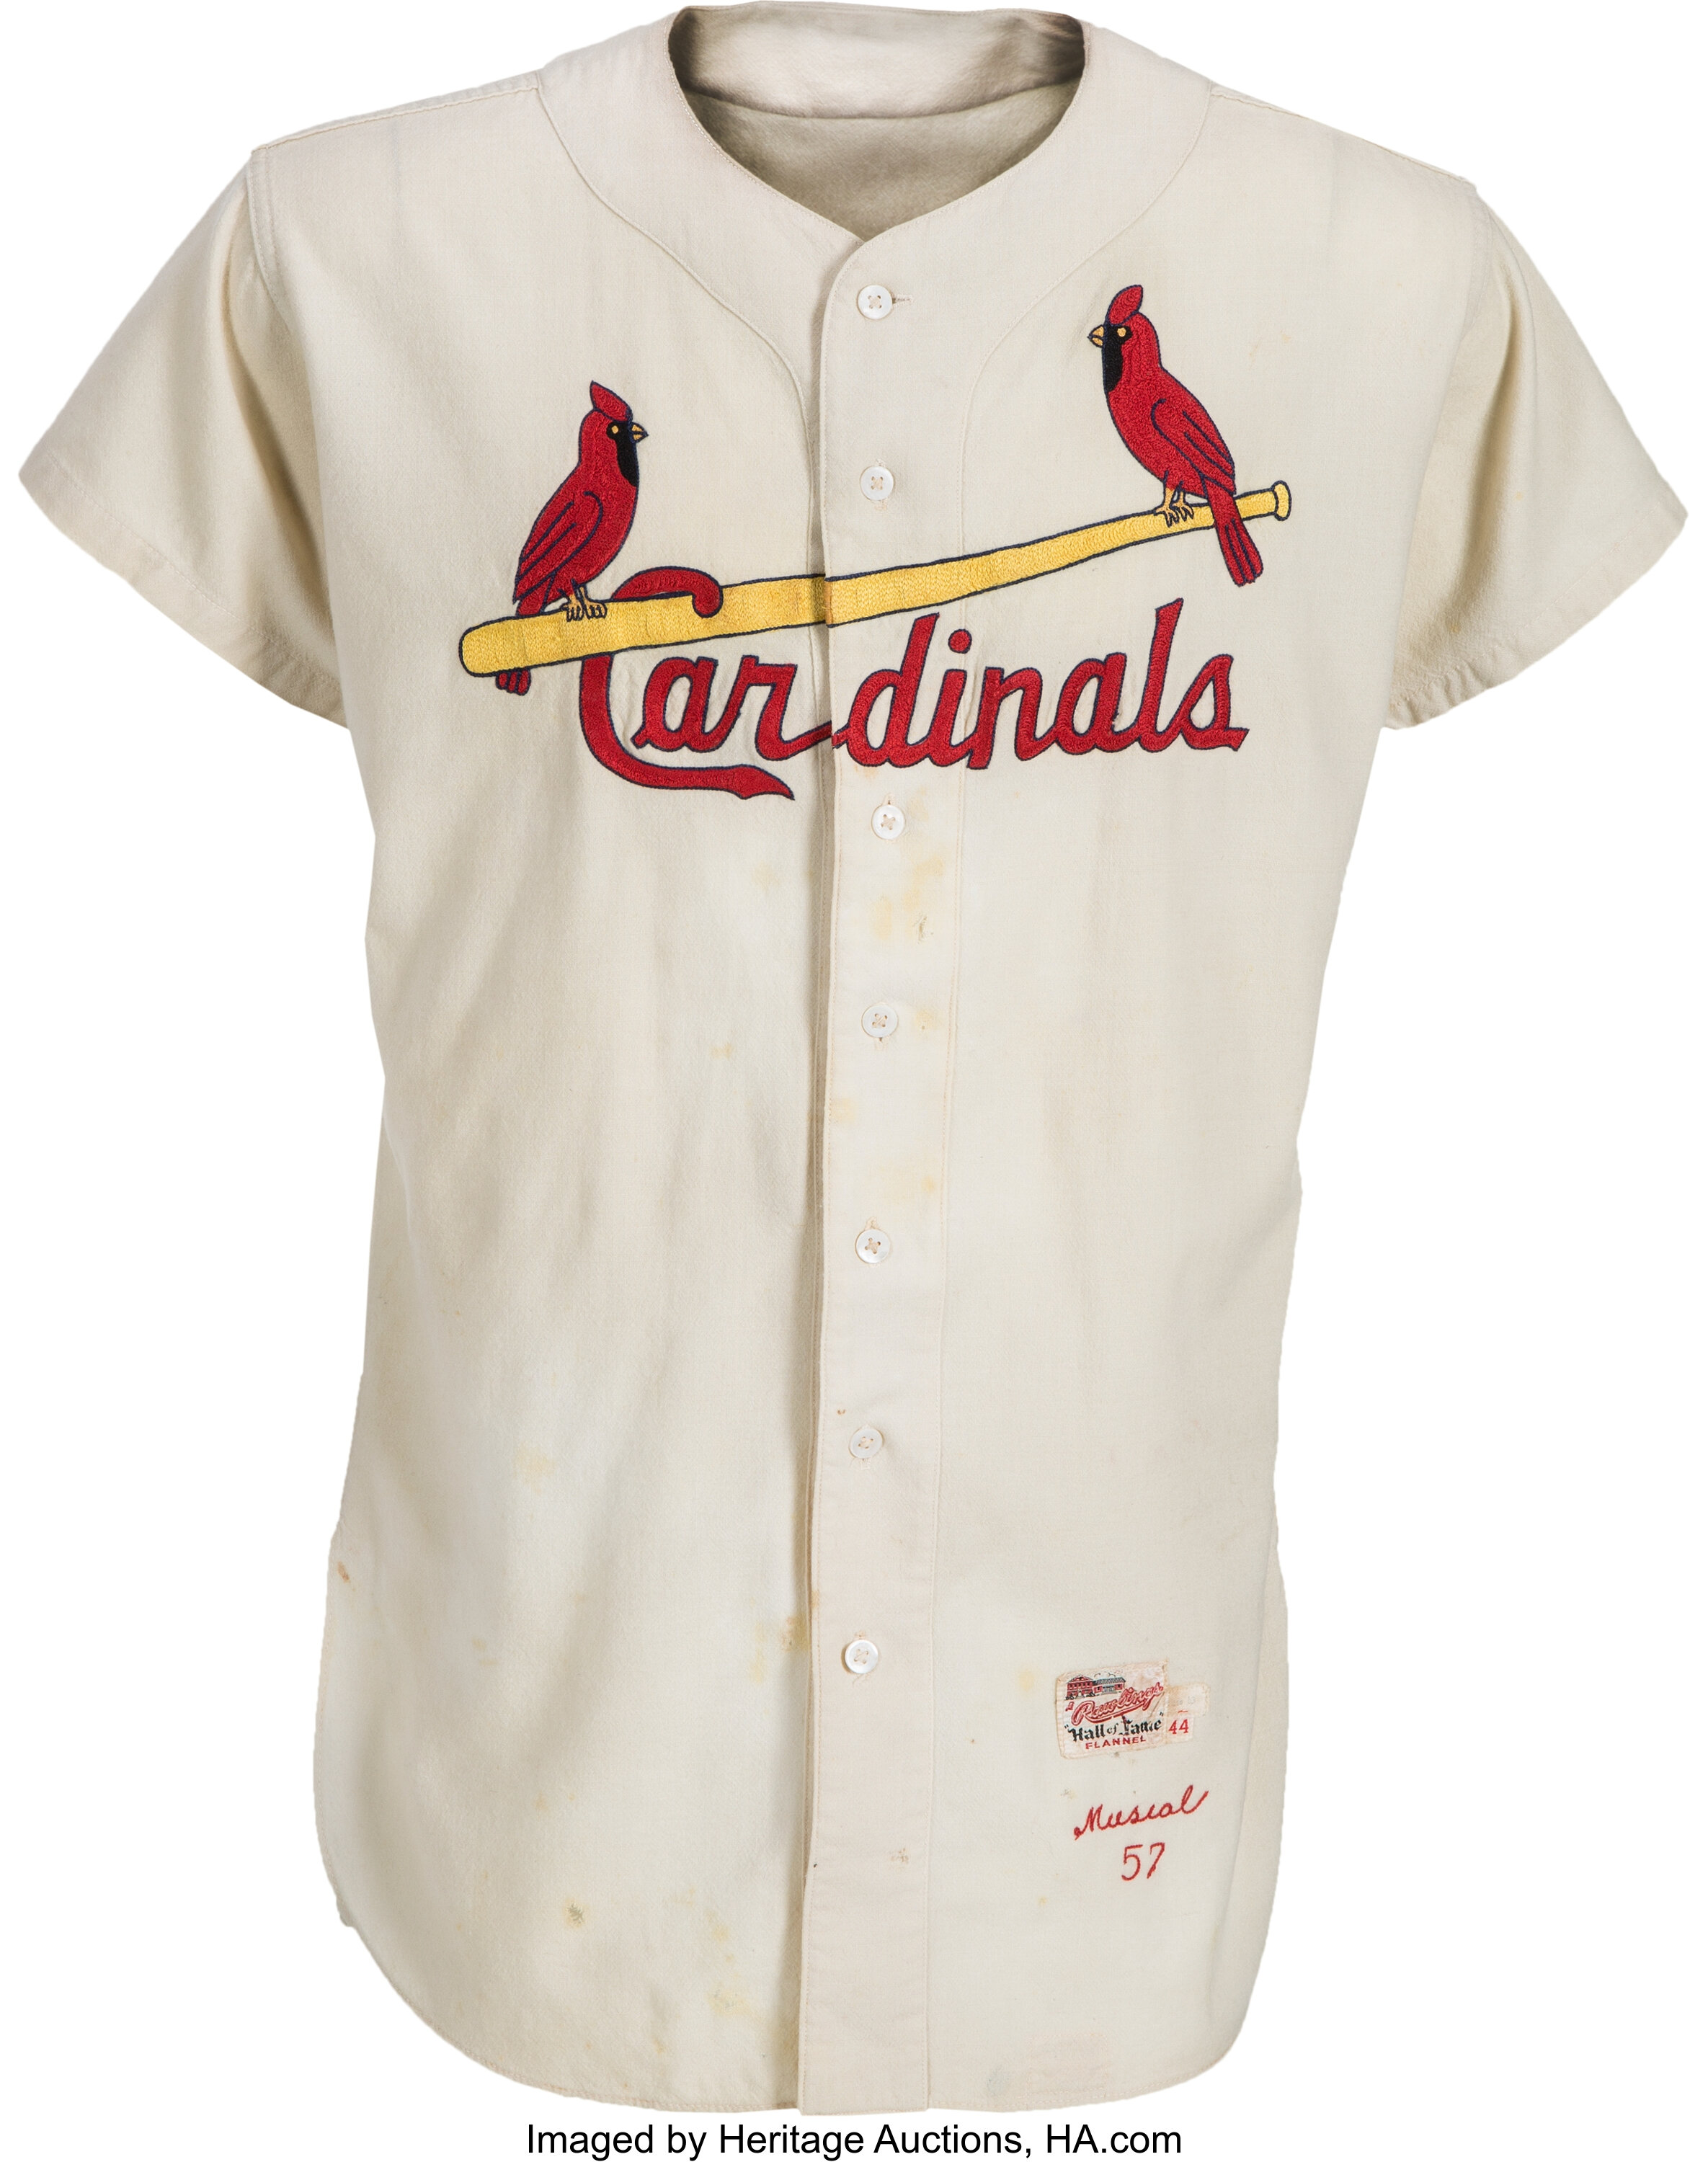 St. Louis Cardinals Jersey, worn by Stan Musial